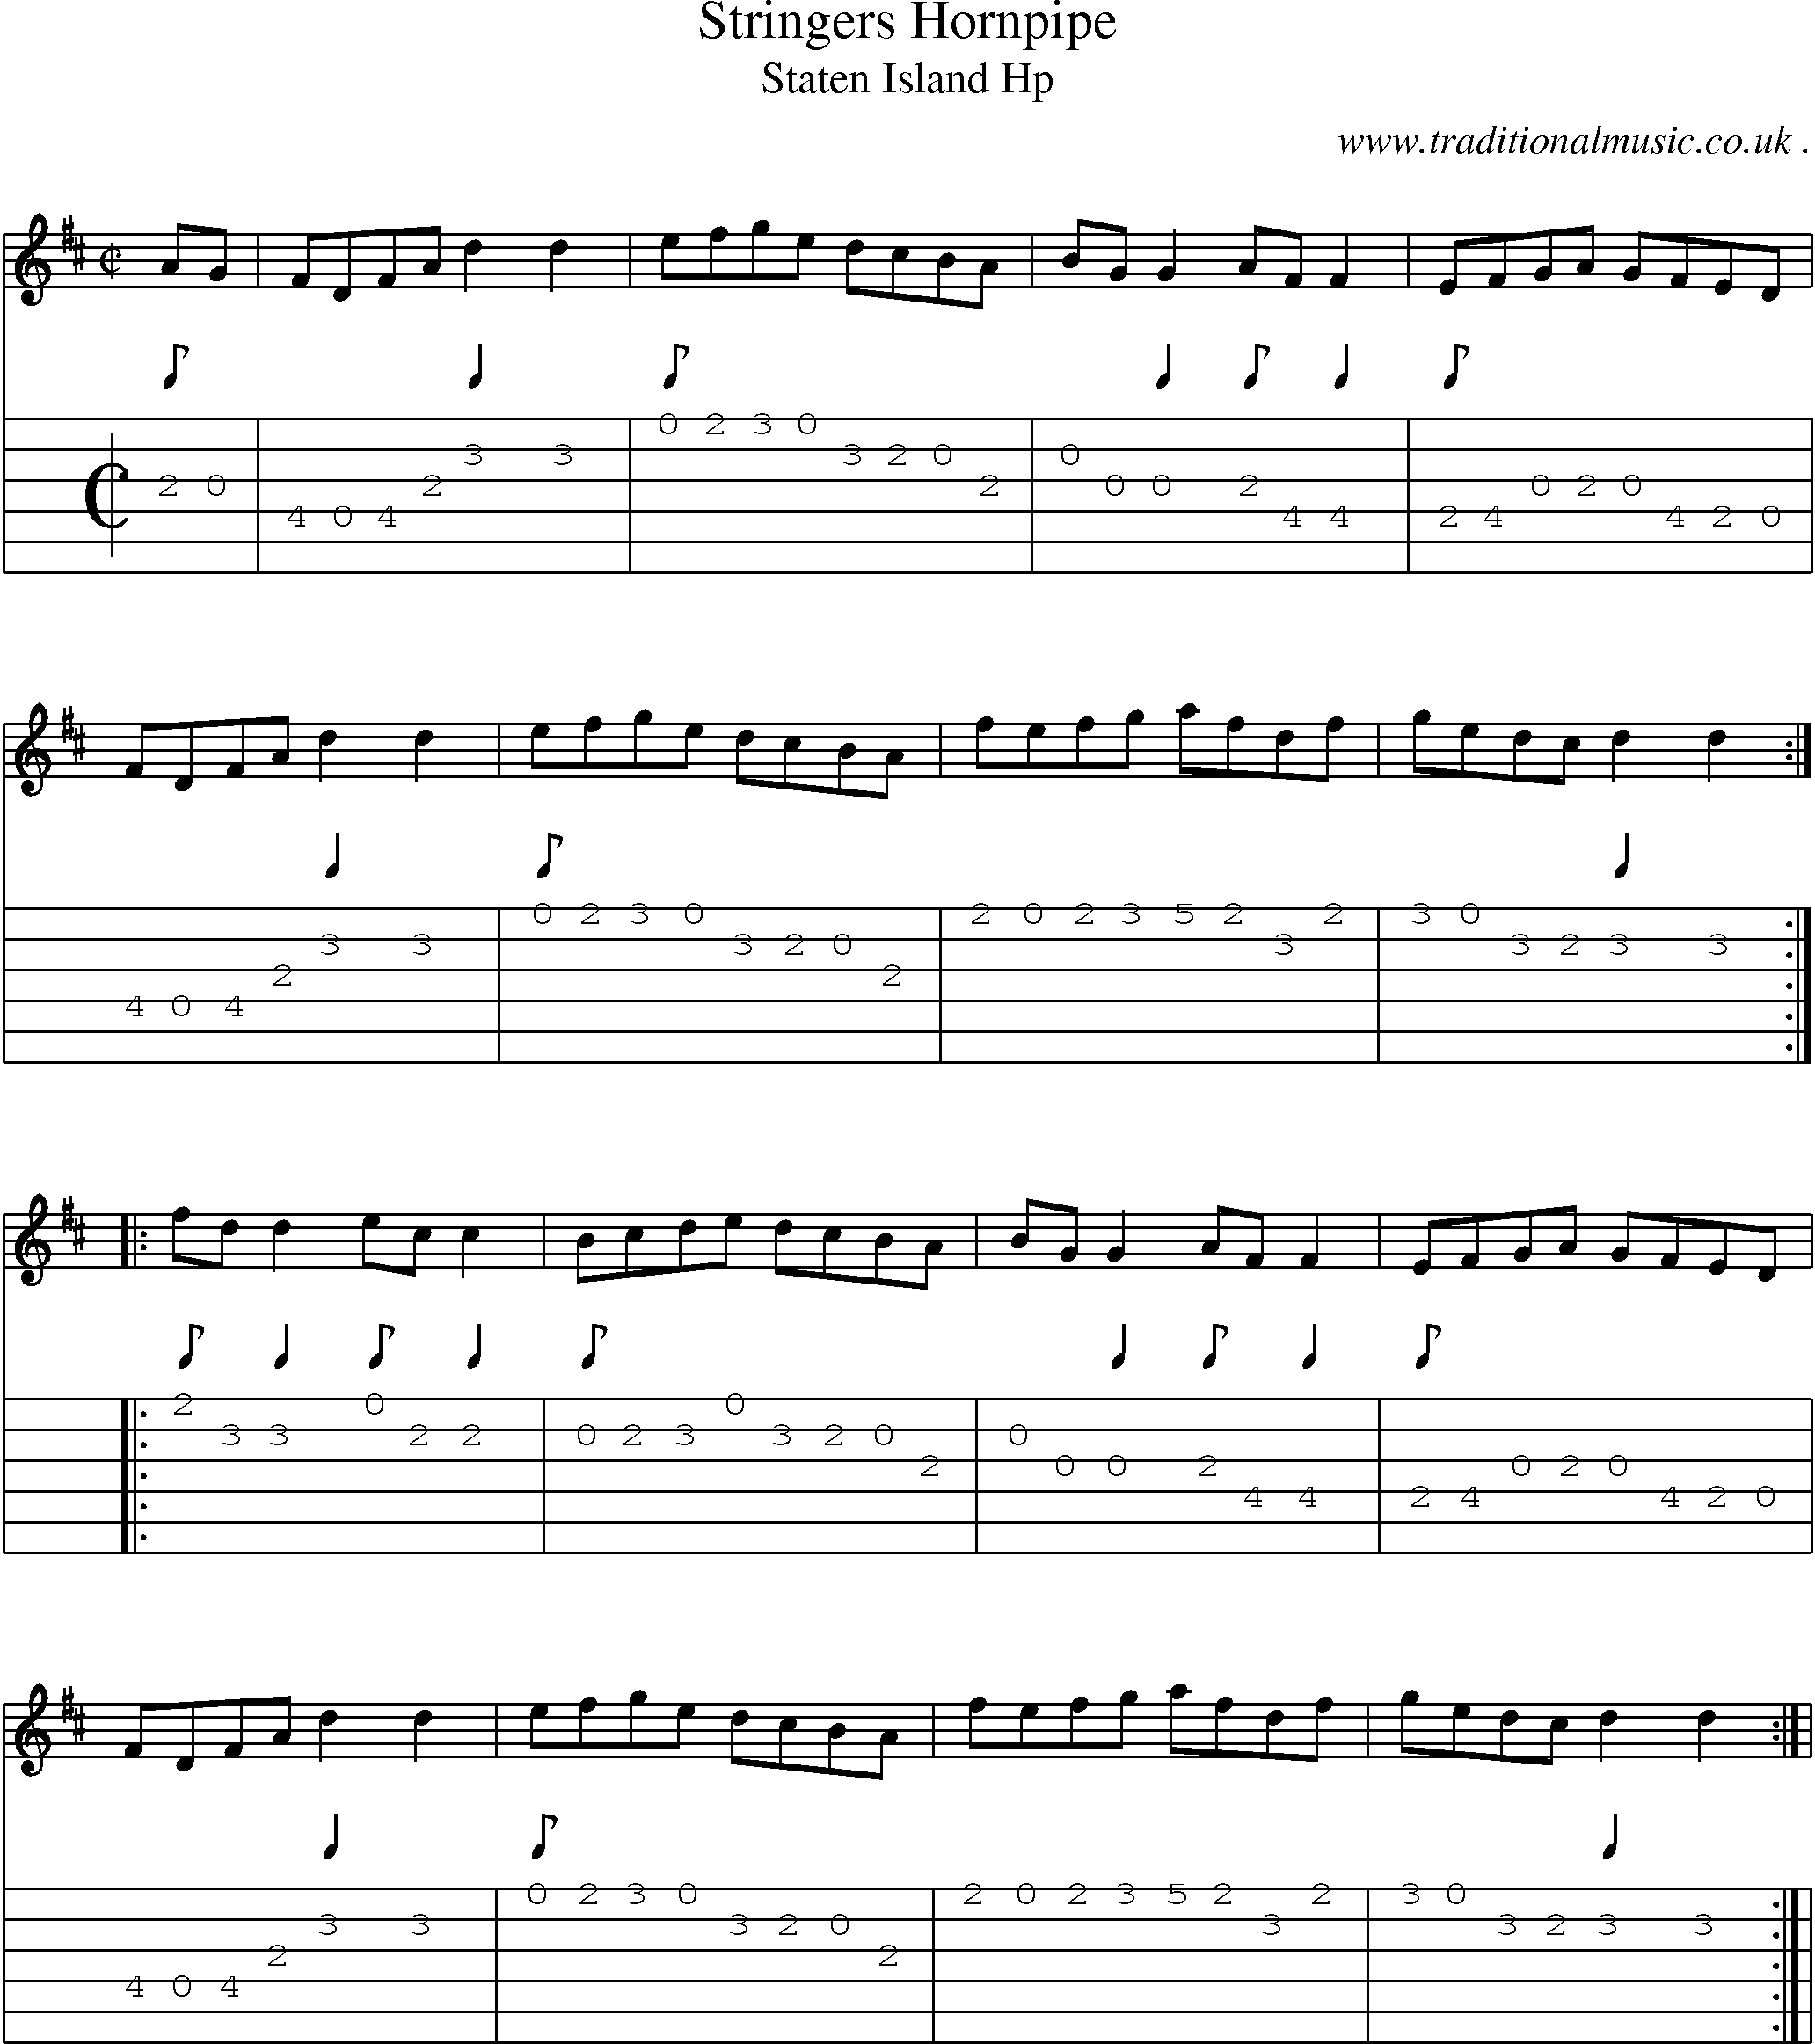 Sheet-Music and Guitar Tabs for Stringers Hornpipe